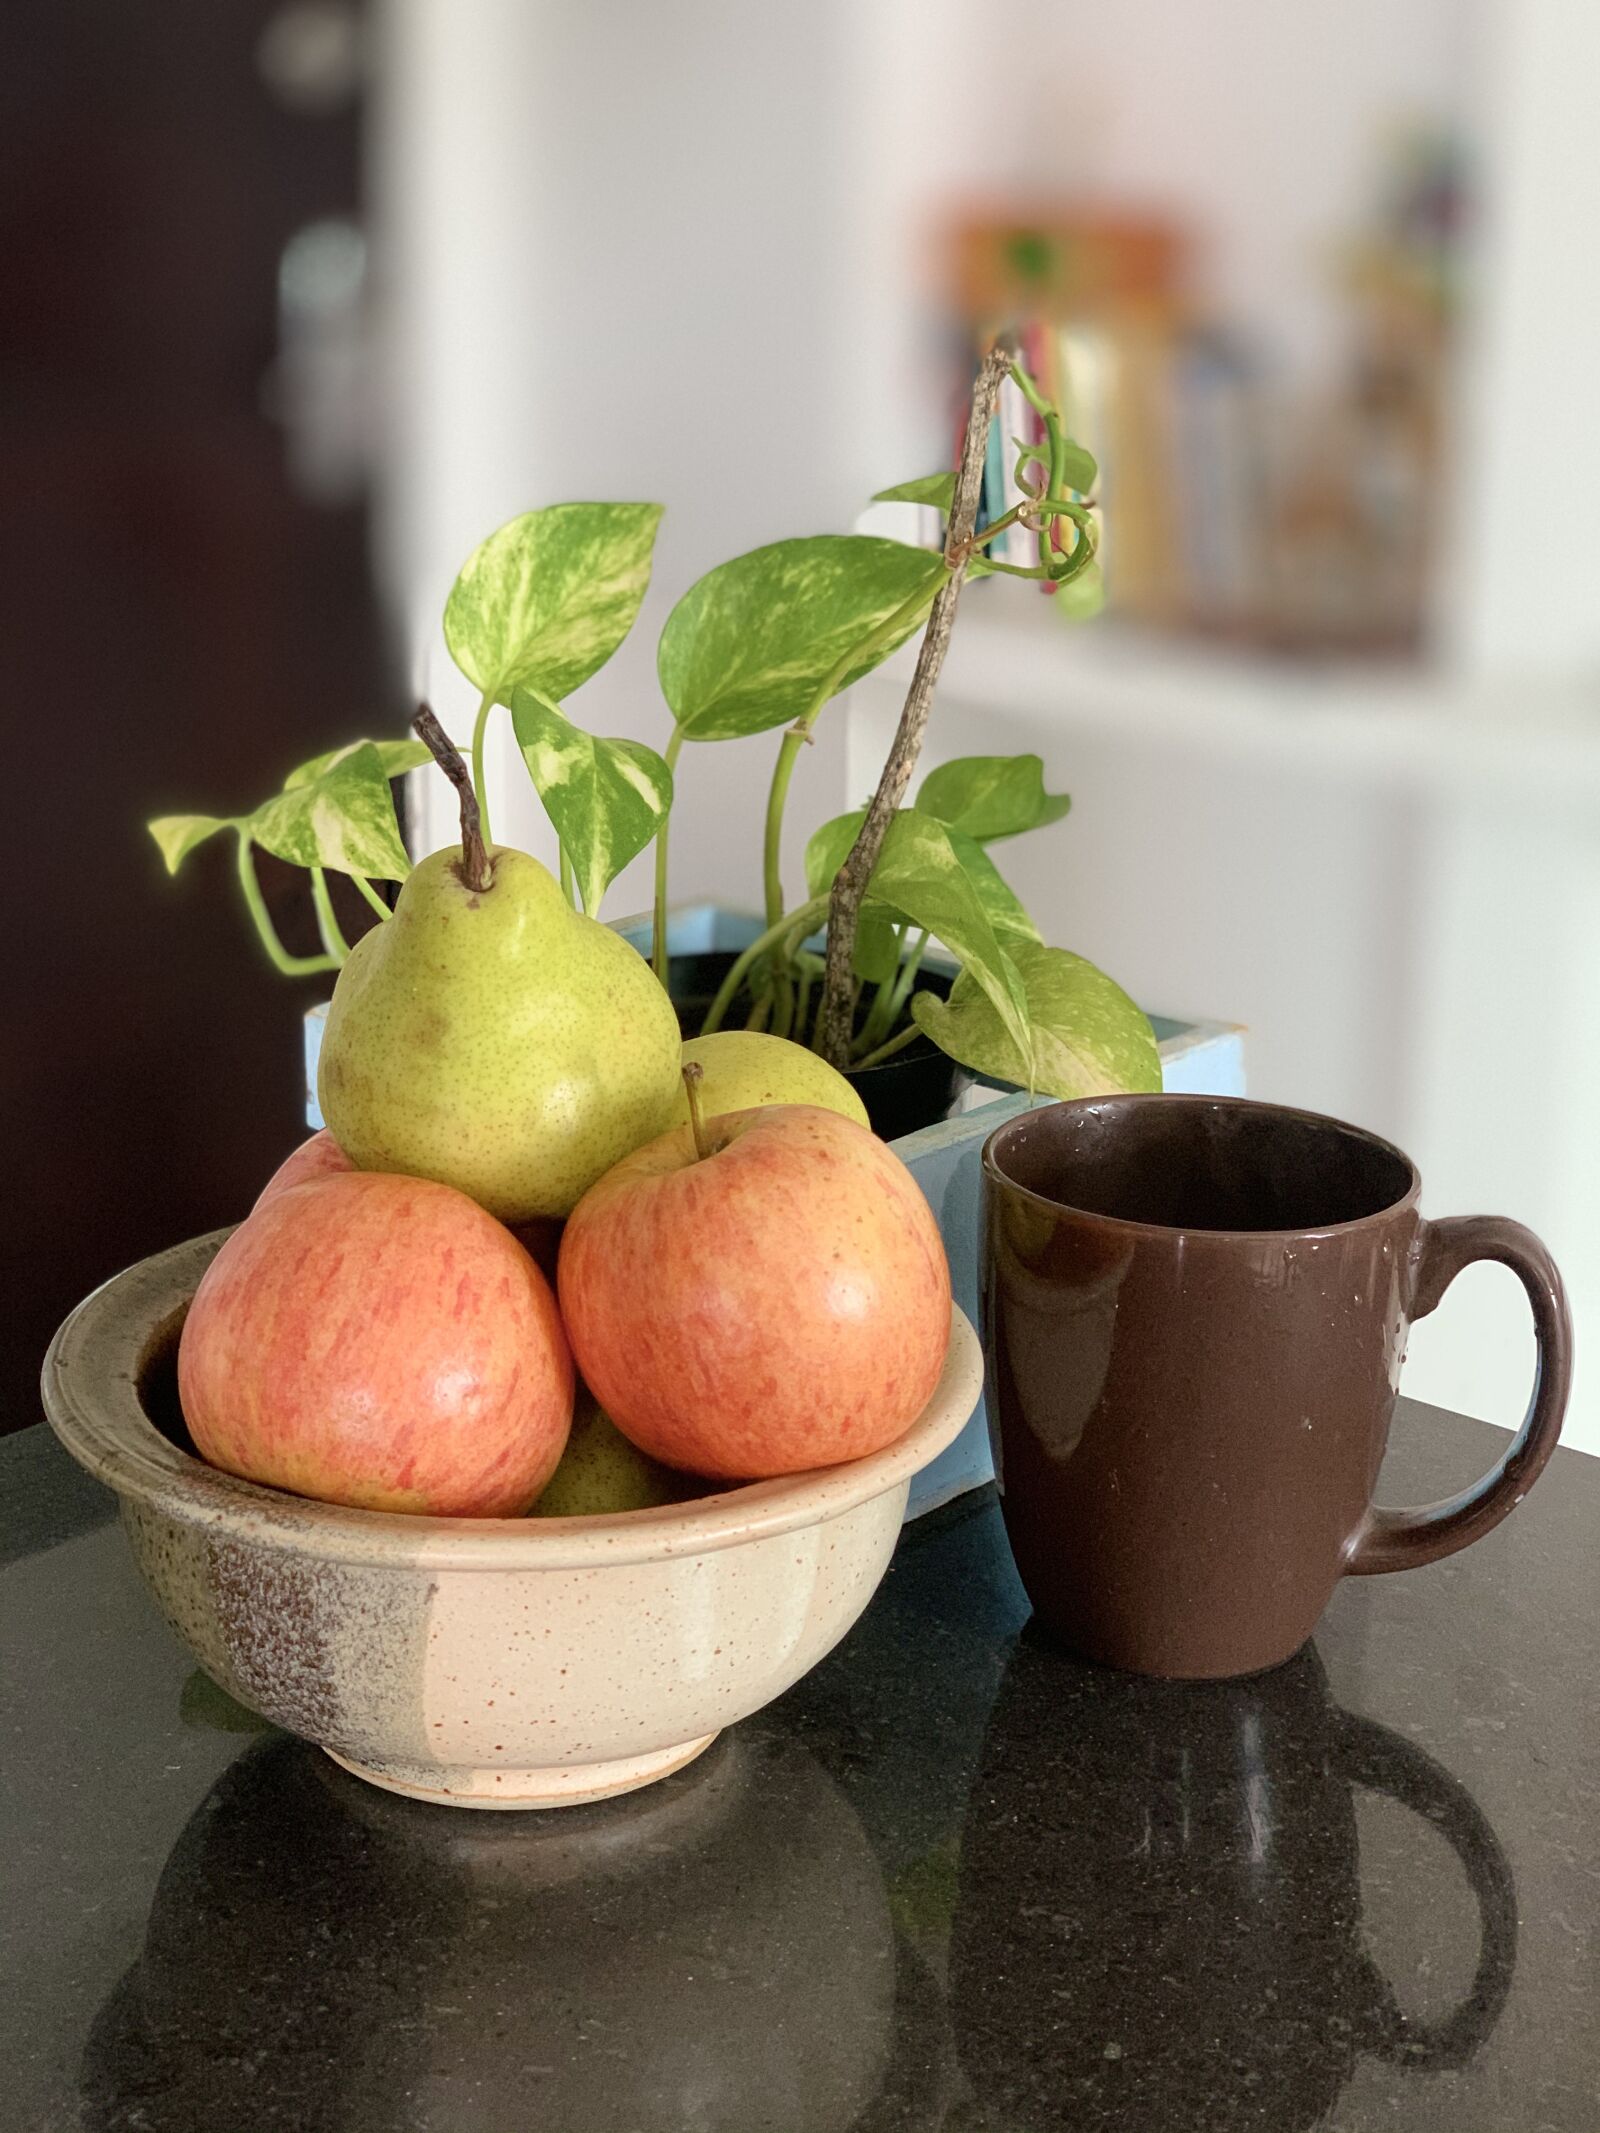 Apple iPhone XS + iPhone XS back dual camera 6mm f/2.4 sample photo. Apples, pears, pear photography